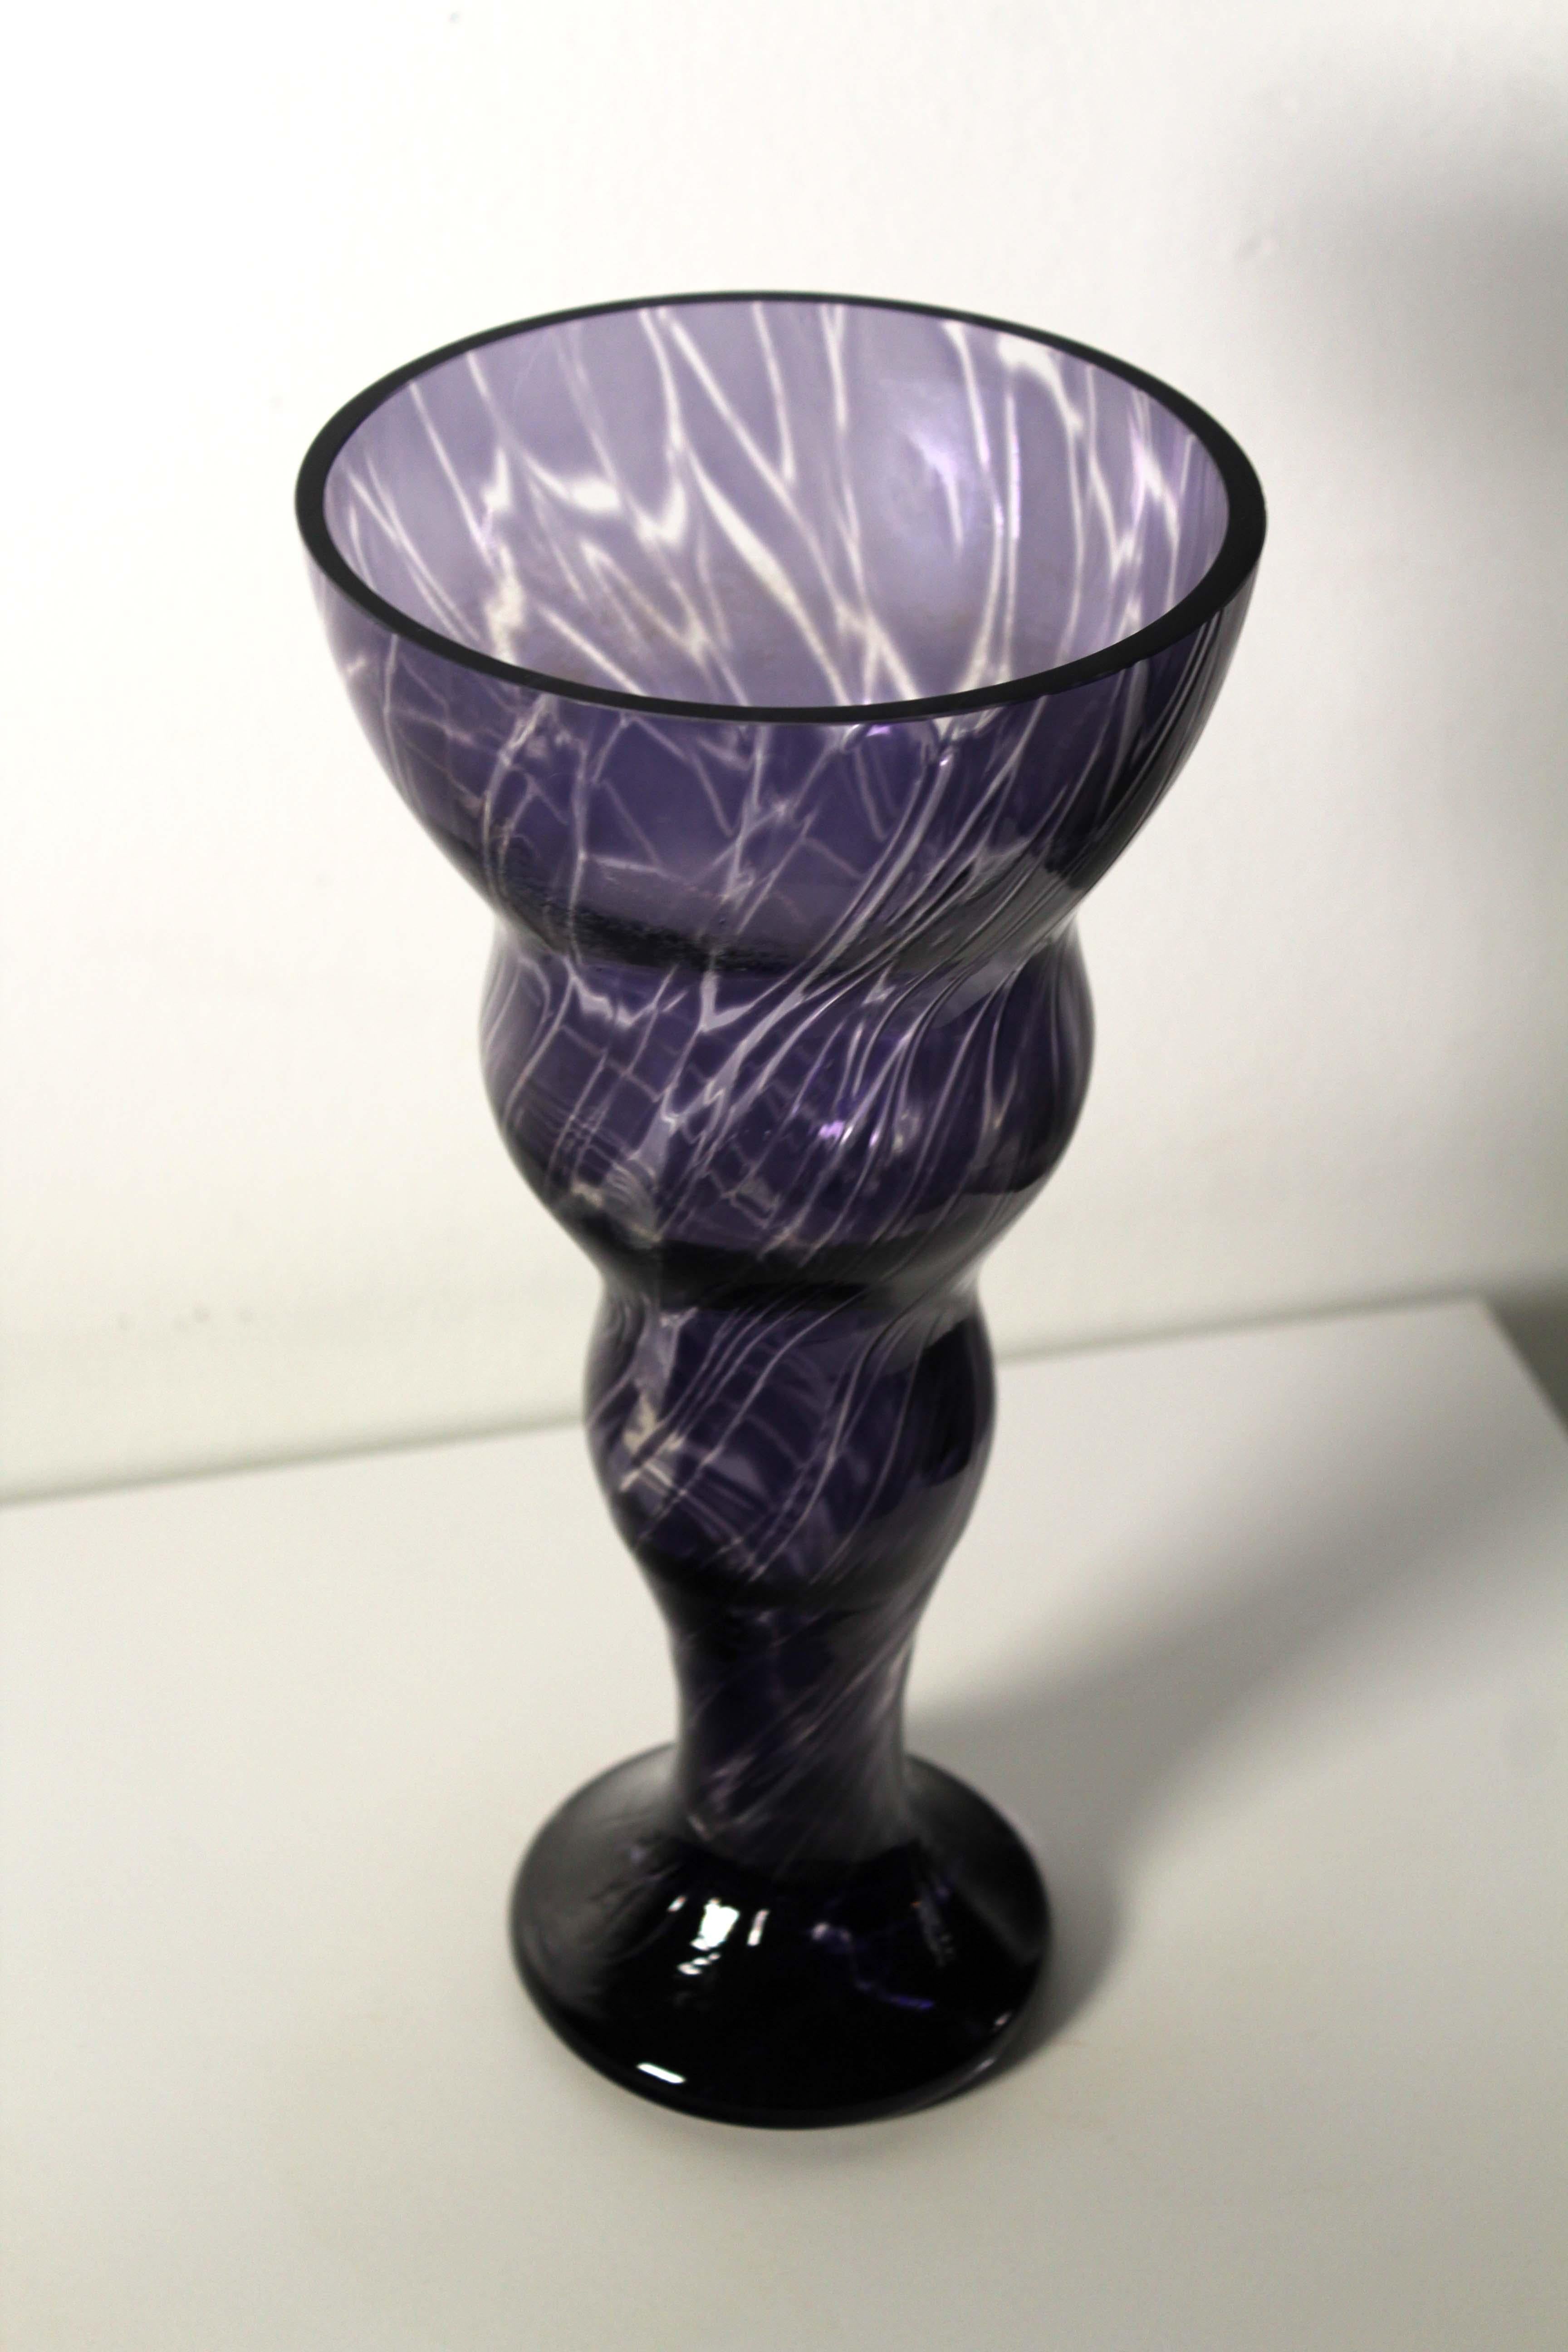 A marvelous handblown glass vase. An indigo color with a swirl design. A wonderful accent piece in a modern or contemporary home. Dimensions: 10.25” height x 5” diameter. In very good condition.
  